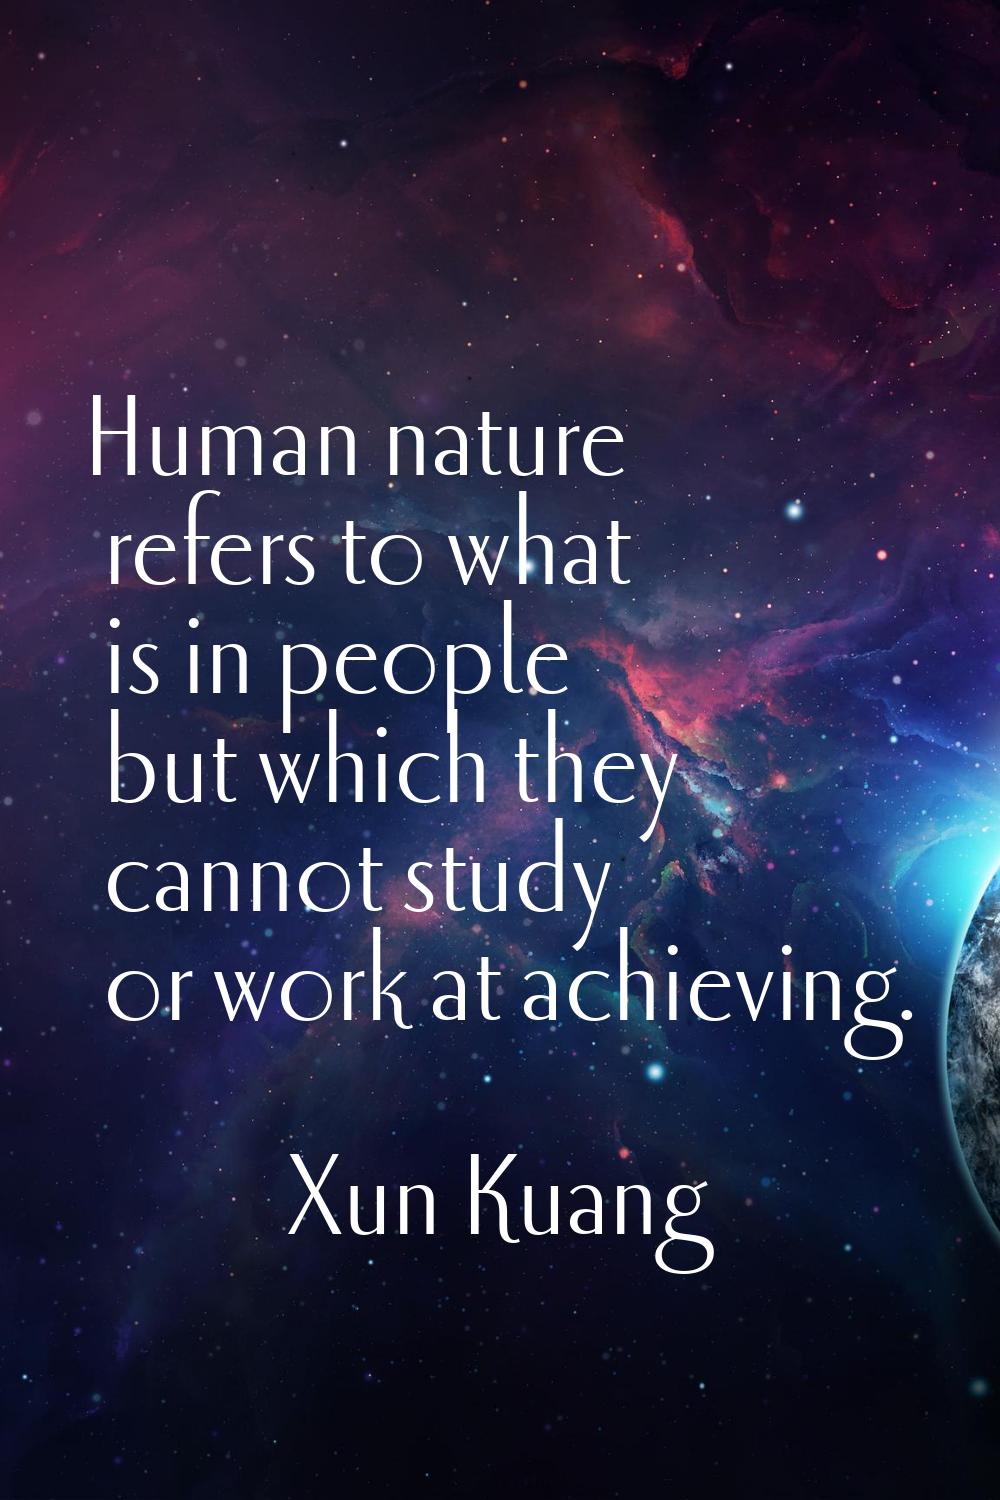 Human nature refers to what is in people but which they cannot study or work at achieving.